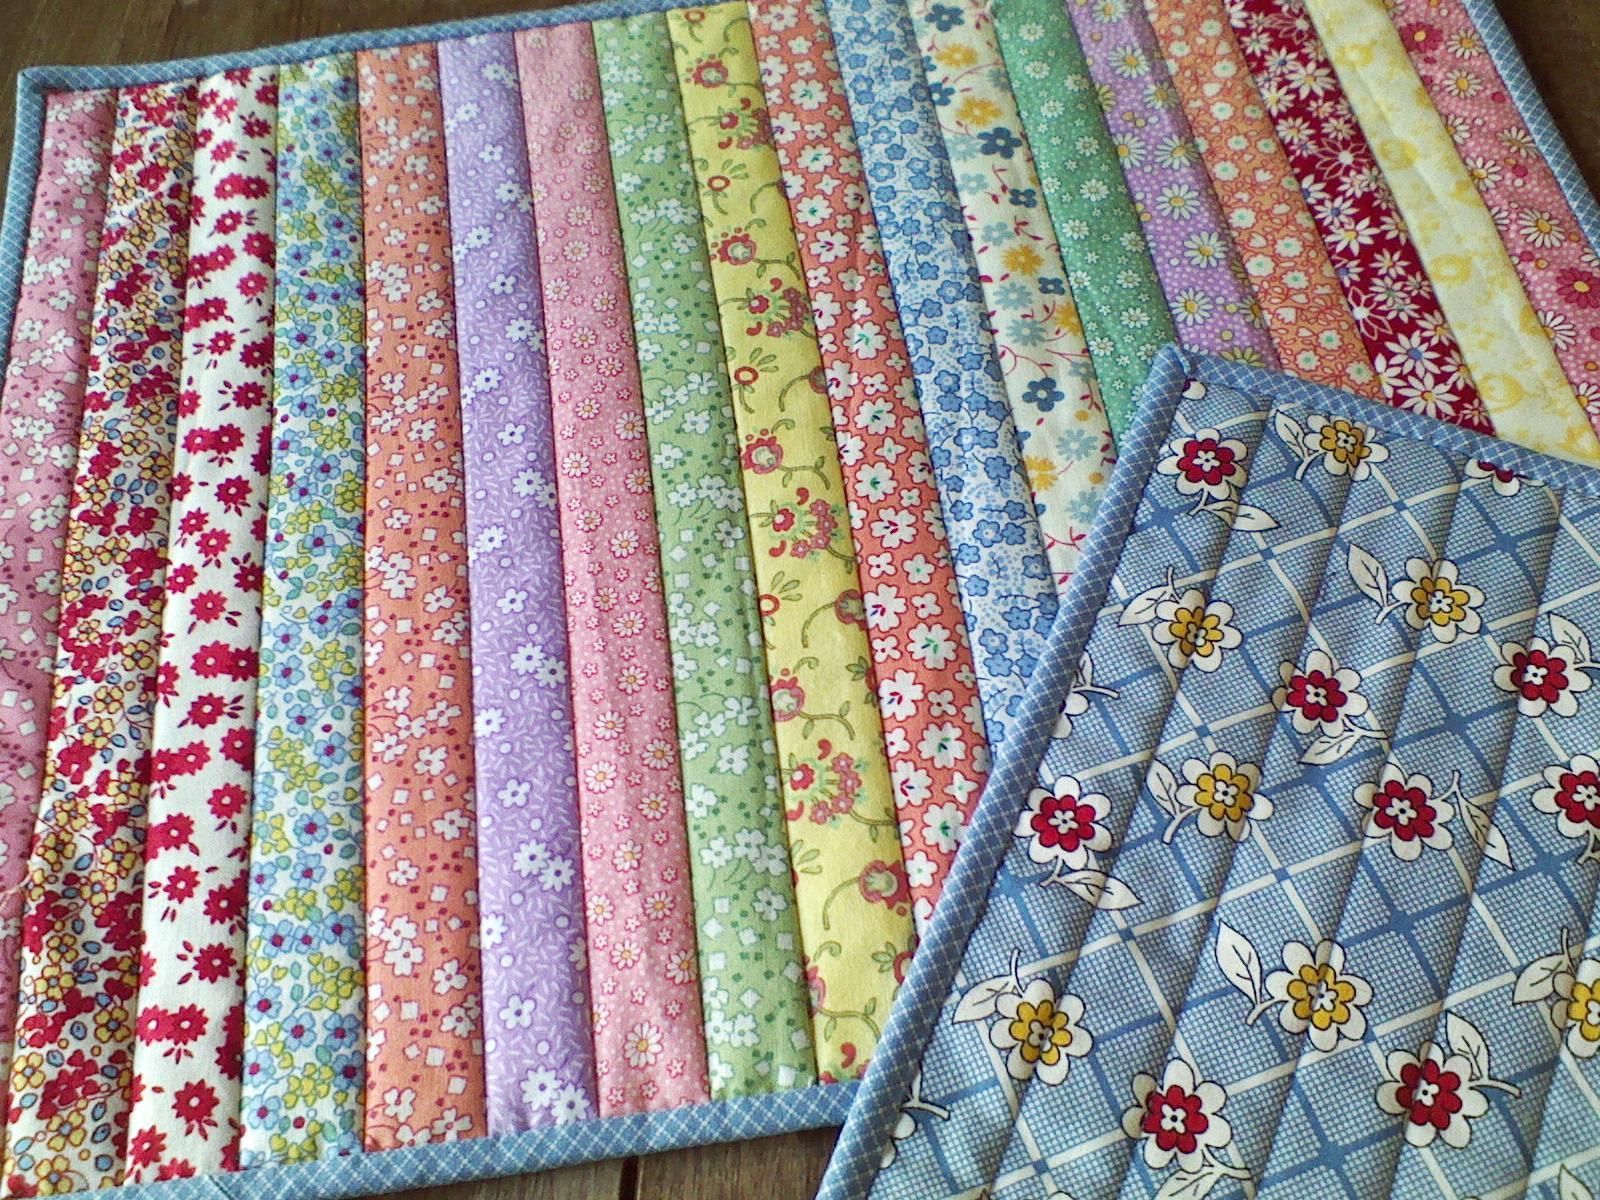 My Patchwork Quilt: SEW & QUILT-IN-0NE PLACEMATS….they would make cute potholders or mug rugs too.